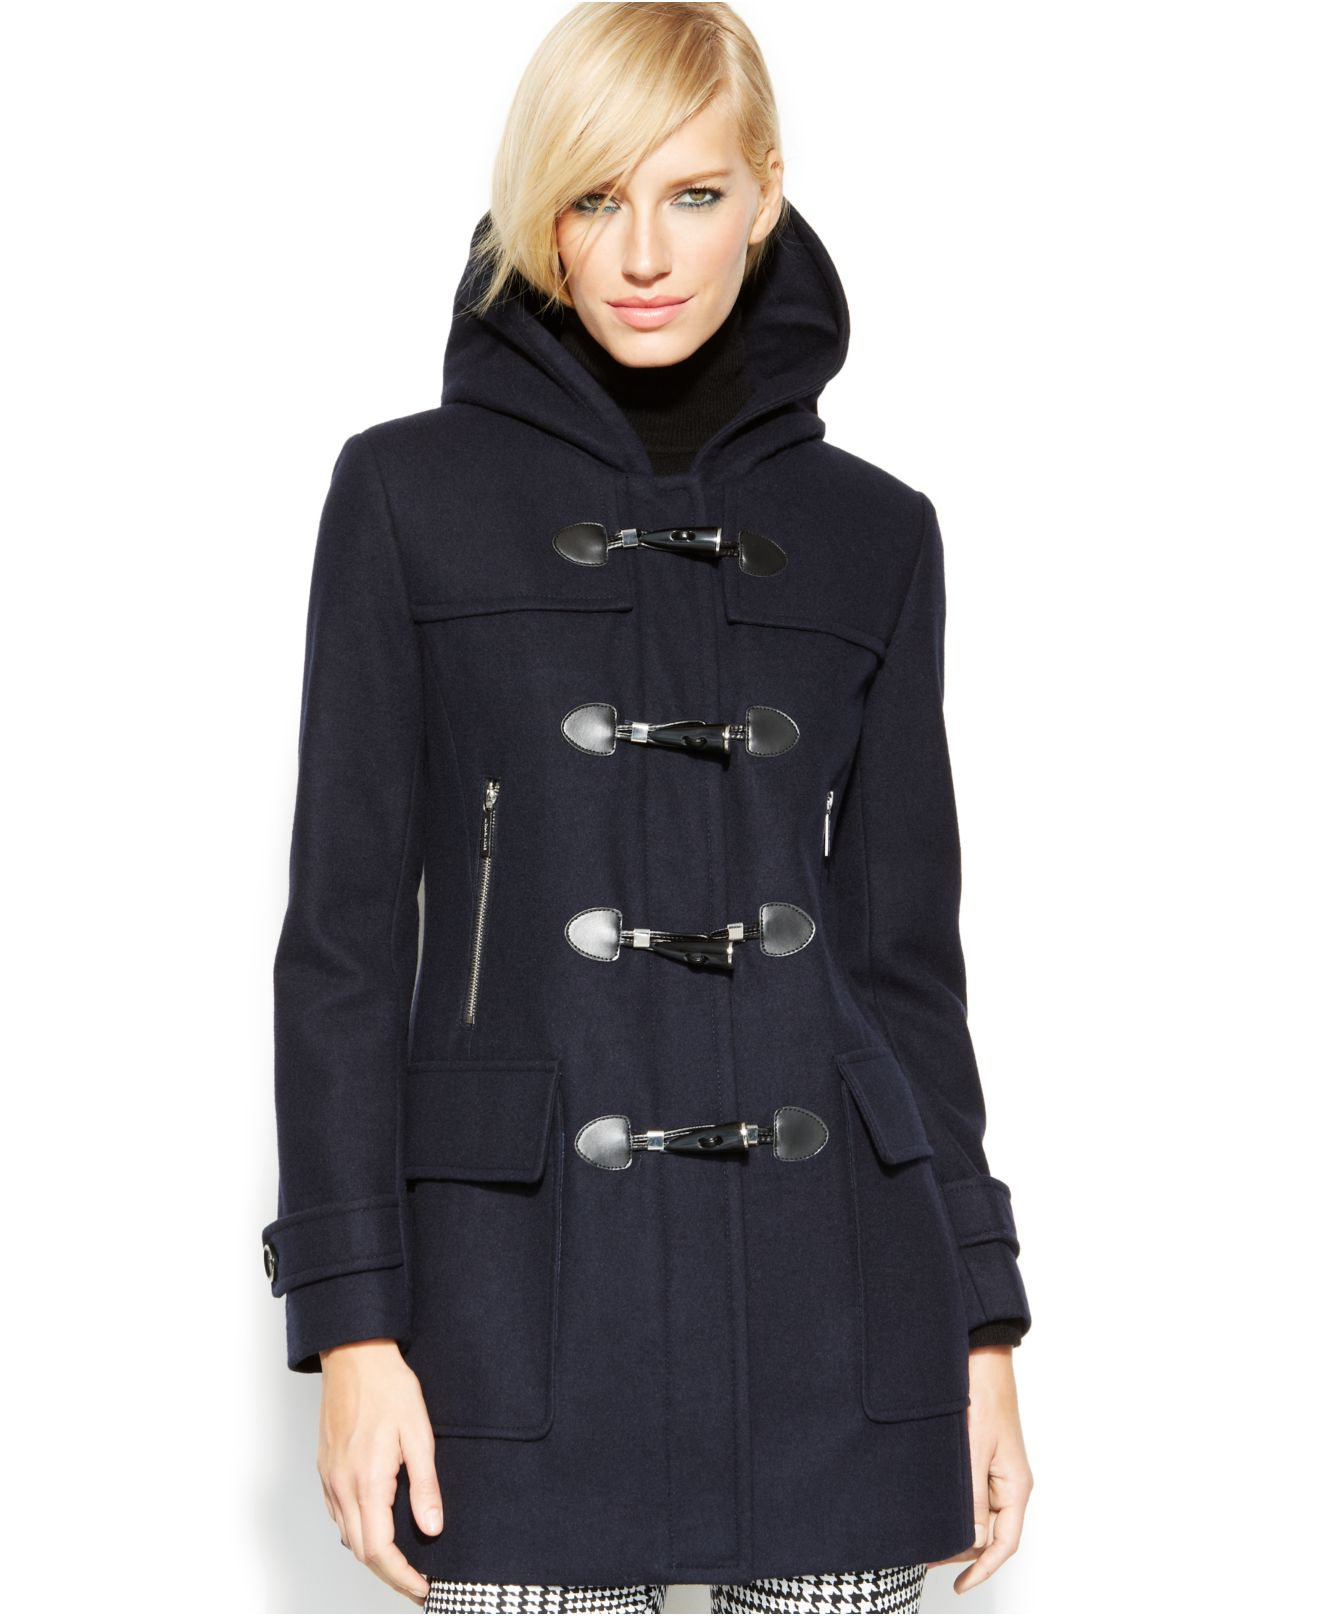 Lyst - Michael Kors Michael Toggle-Front Hooded Coat in Blue